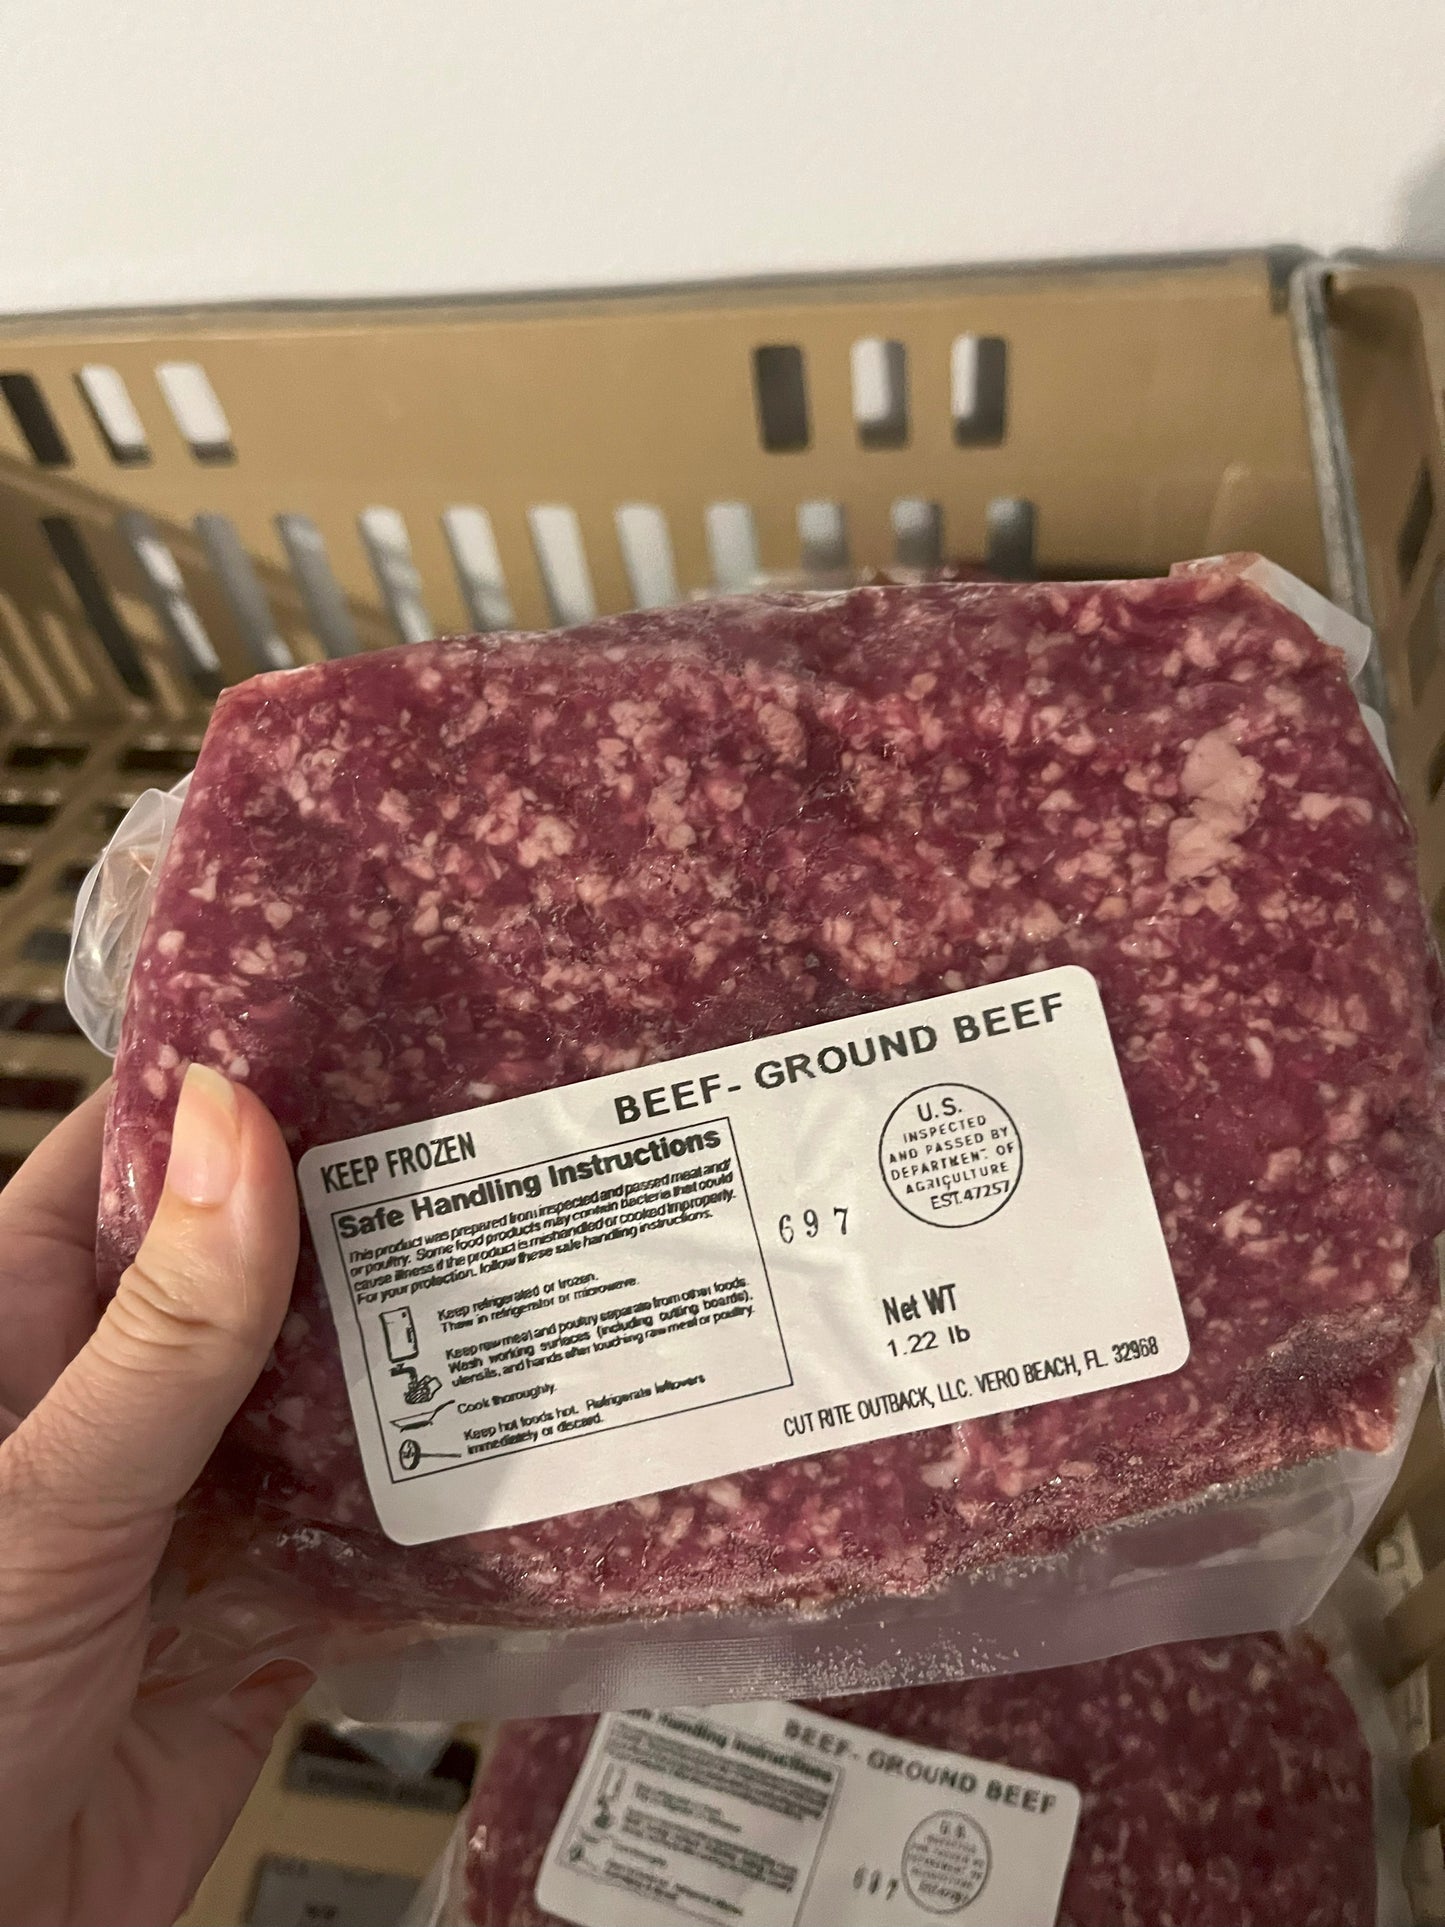 Additional 2lbs of Ground Beef